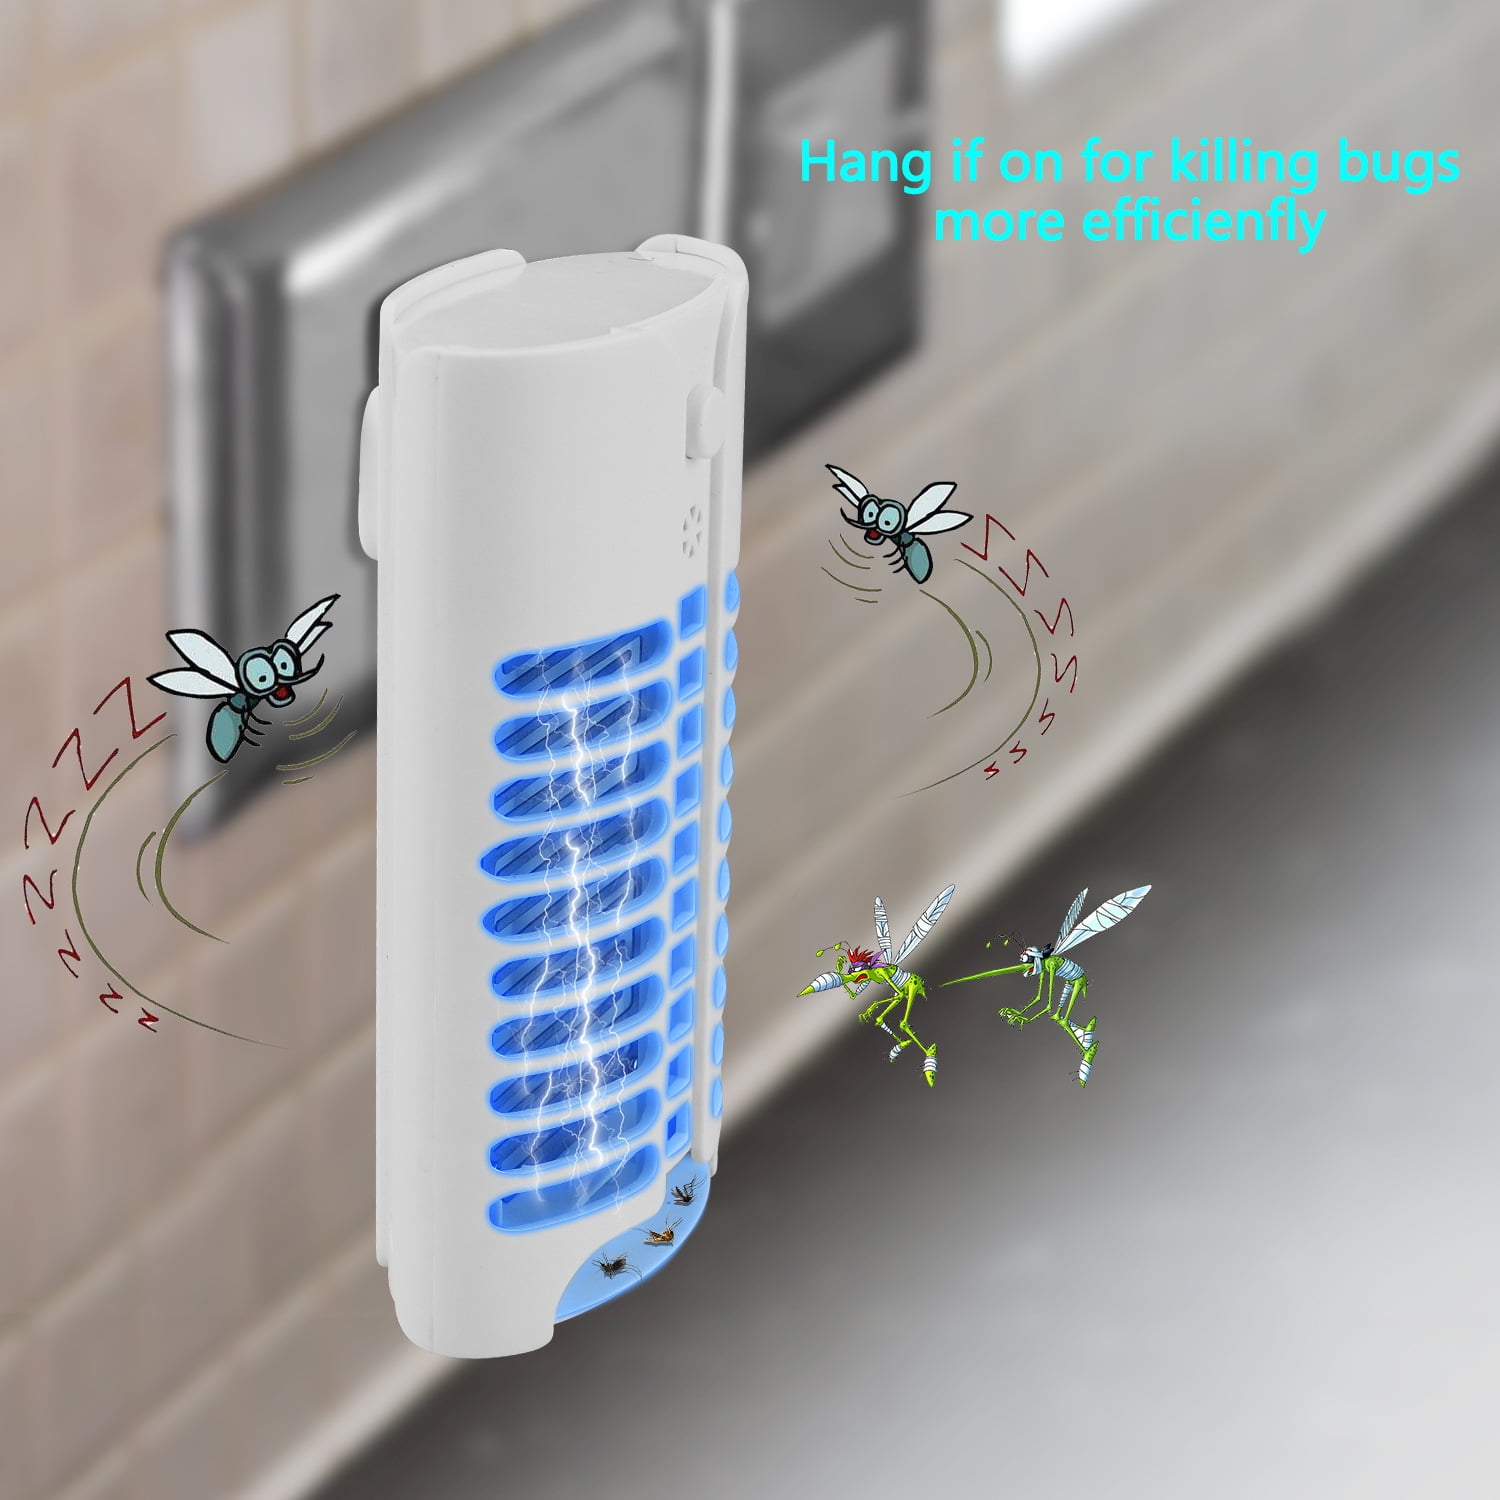 12w Electric Fly Zapper Insect Killer Bug Pest Trap Small Fly Killer Catcher UK 